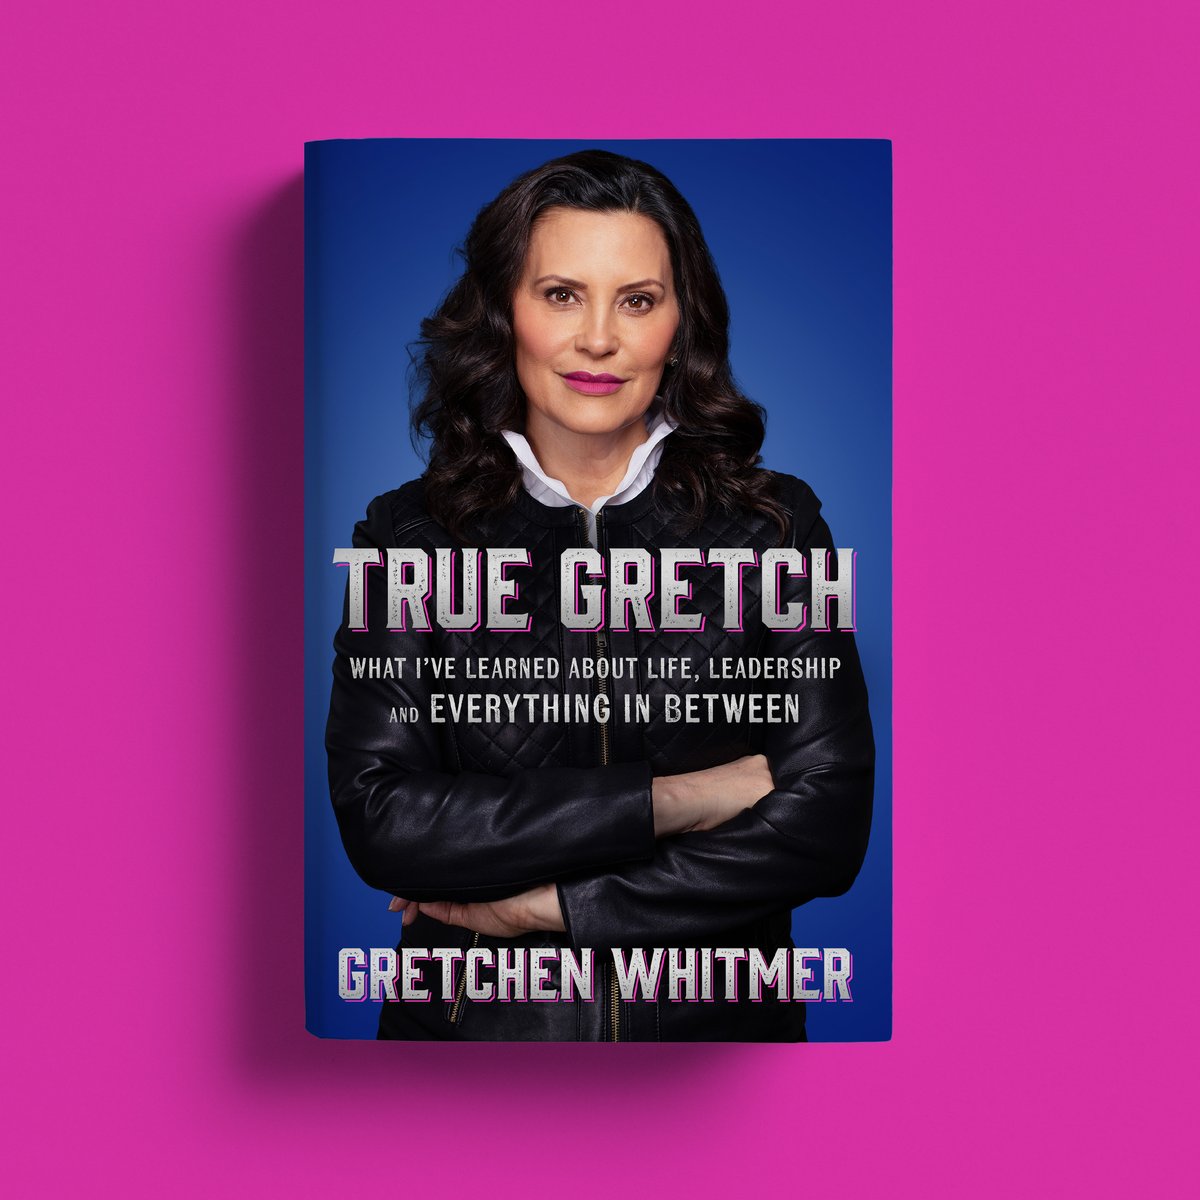 Coming July 9! TRUE GRETCH is a compelling exploration of Michigan governor @truegretch's remarkable life and career, and a blueprint for anyone who wants to find the good and make a difference in their community, their country, or the world. Pre-order: spr.ly/6012wJoGn